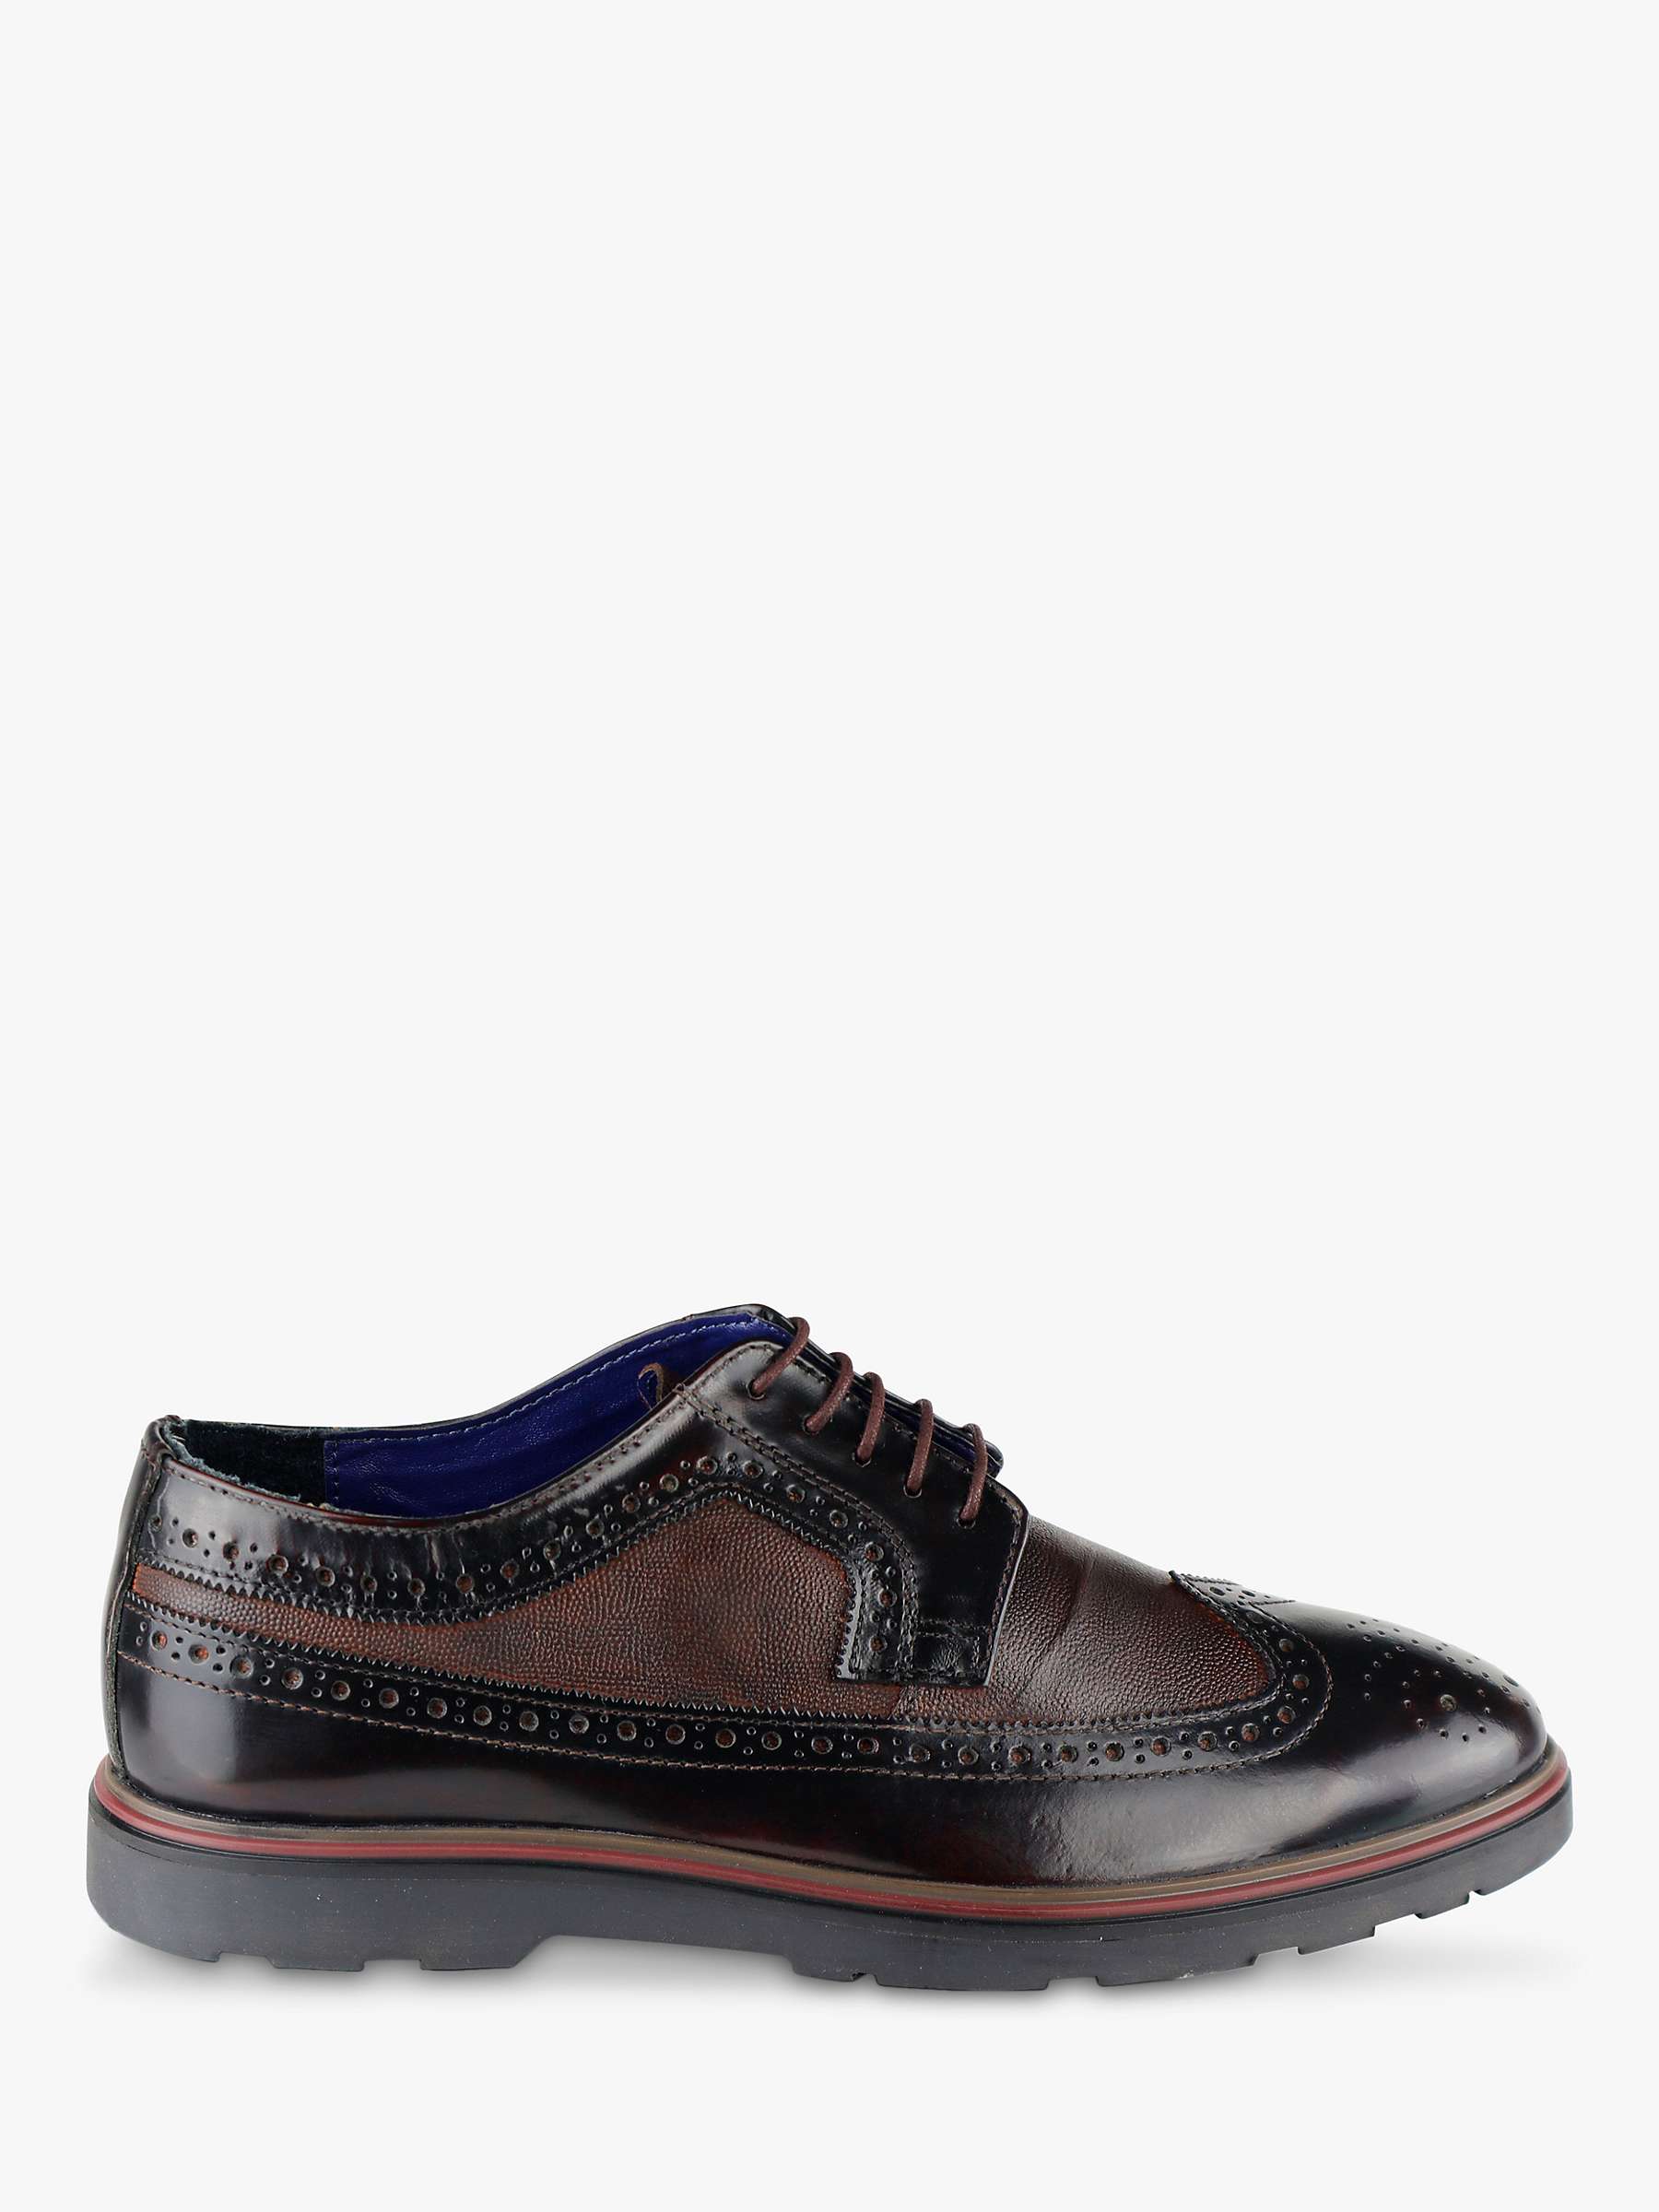 Buy Silver Street London Soho Leather Brogues Online at johnlewis.com